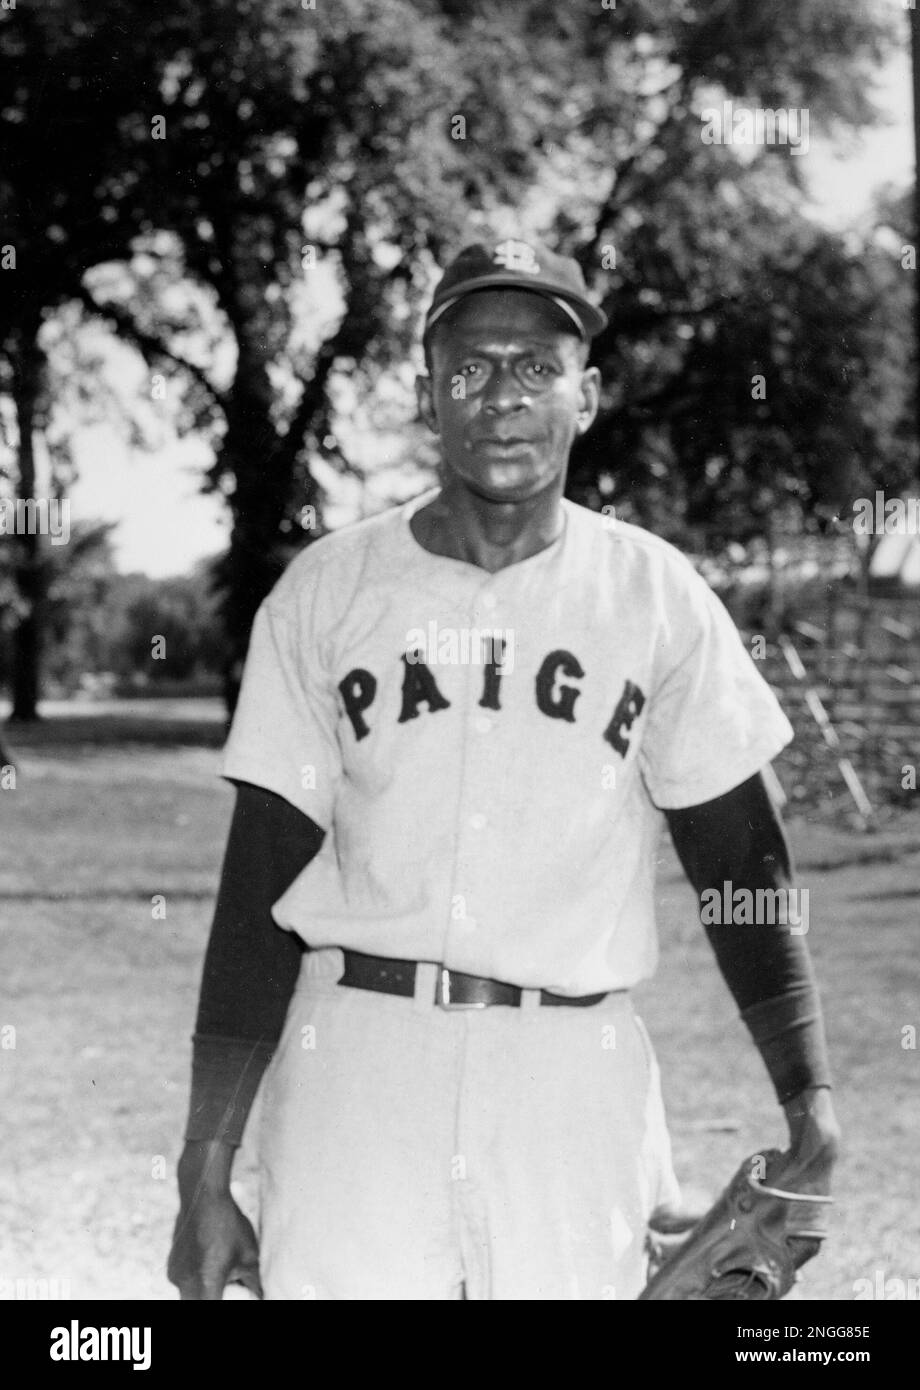 Leroy Satchel Paige, pitcher for the St. Louis Browns, poses at